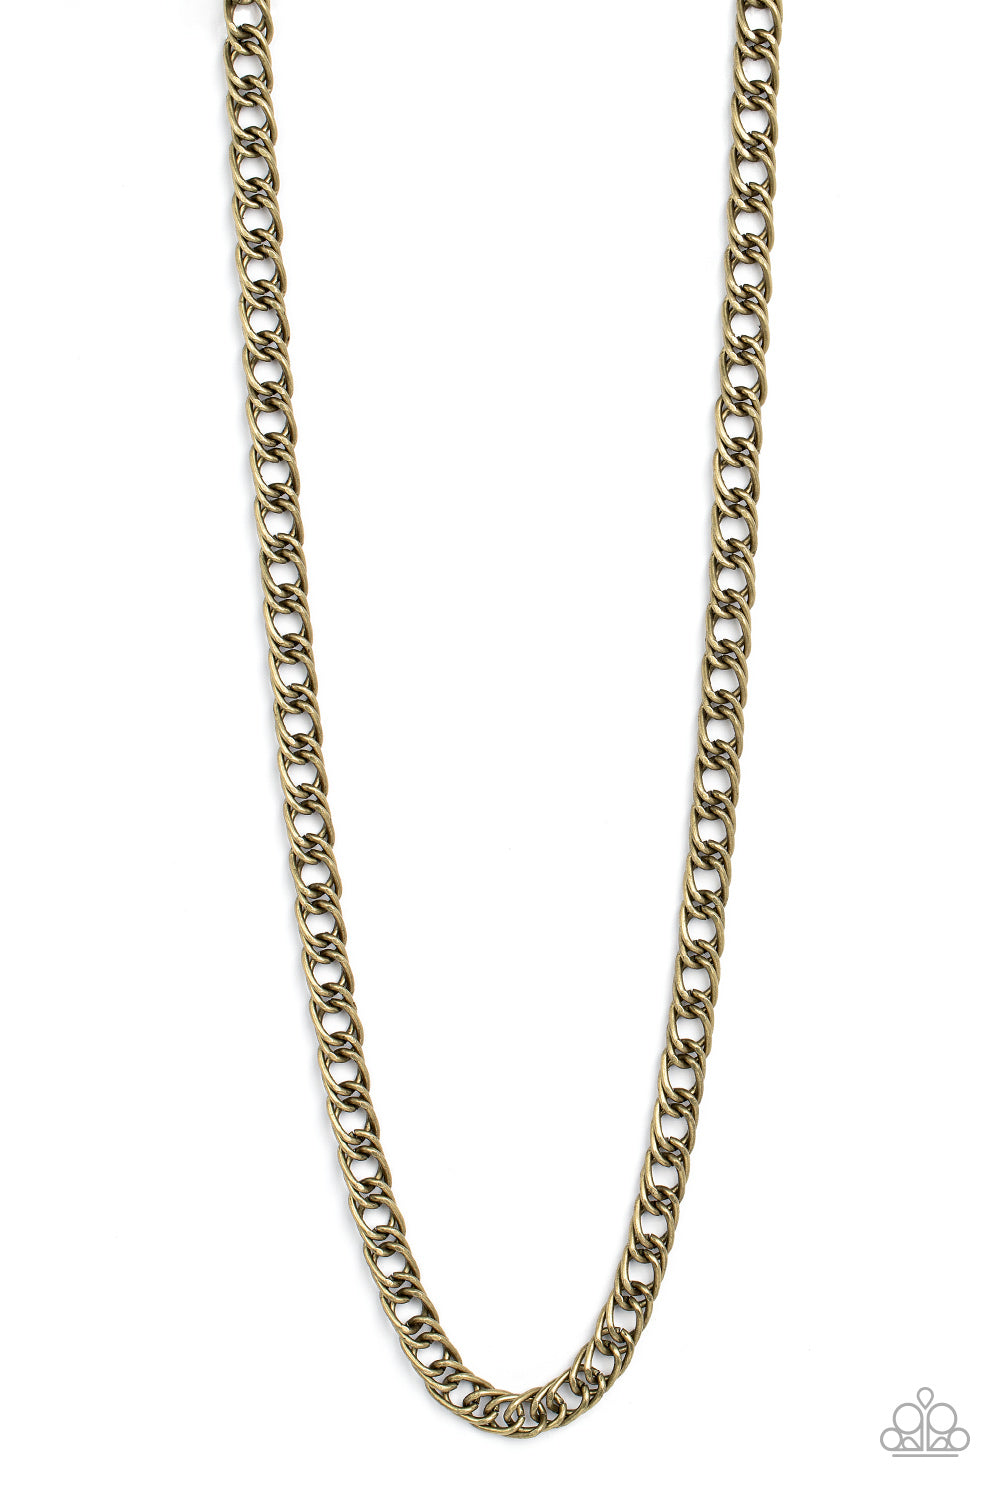 Paparazzi Accessories Pro League - Brass Brushed in a rustic finish, pairs of oversized brass oval links lock in place across the chest for a gritty industrial fashion. Features an adjustable clasp closure. Sold as one individual necklace. Jewelry